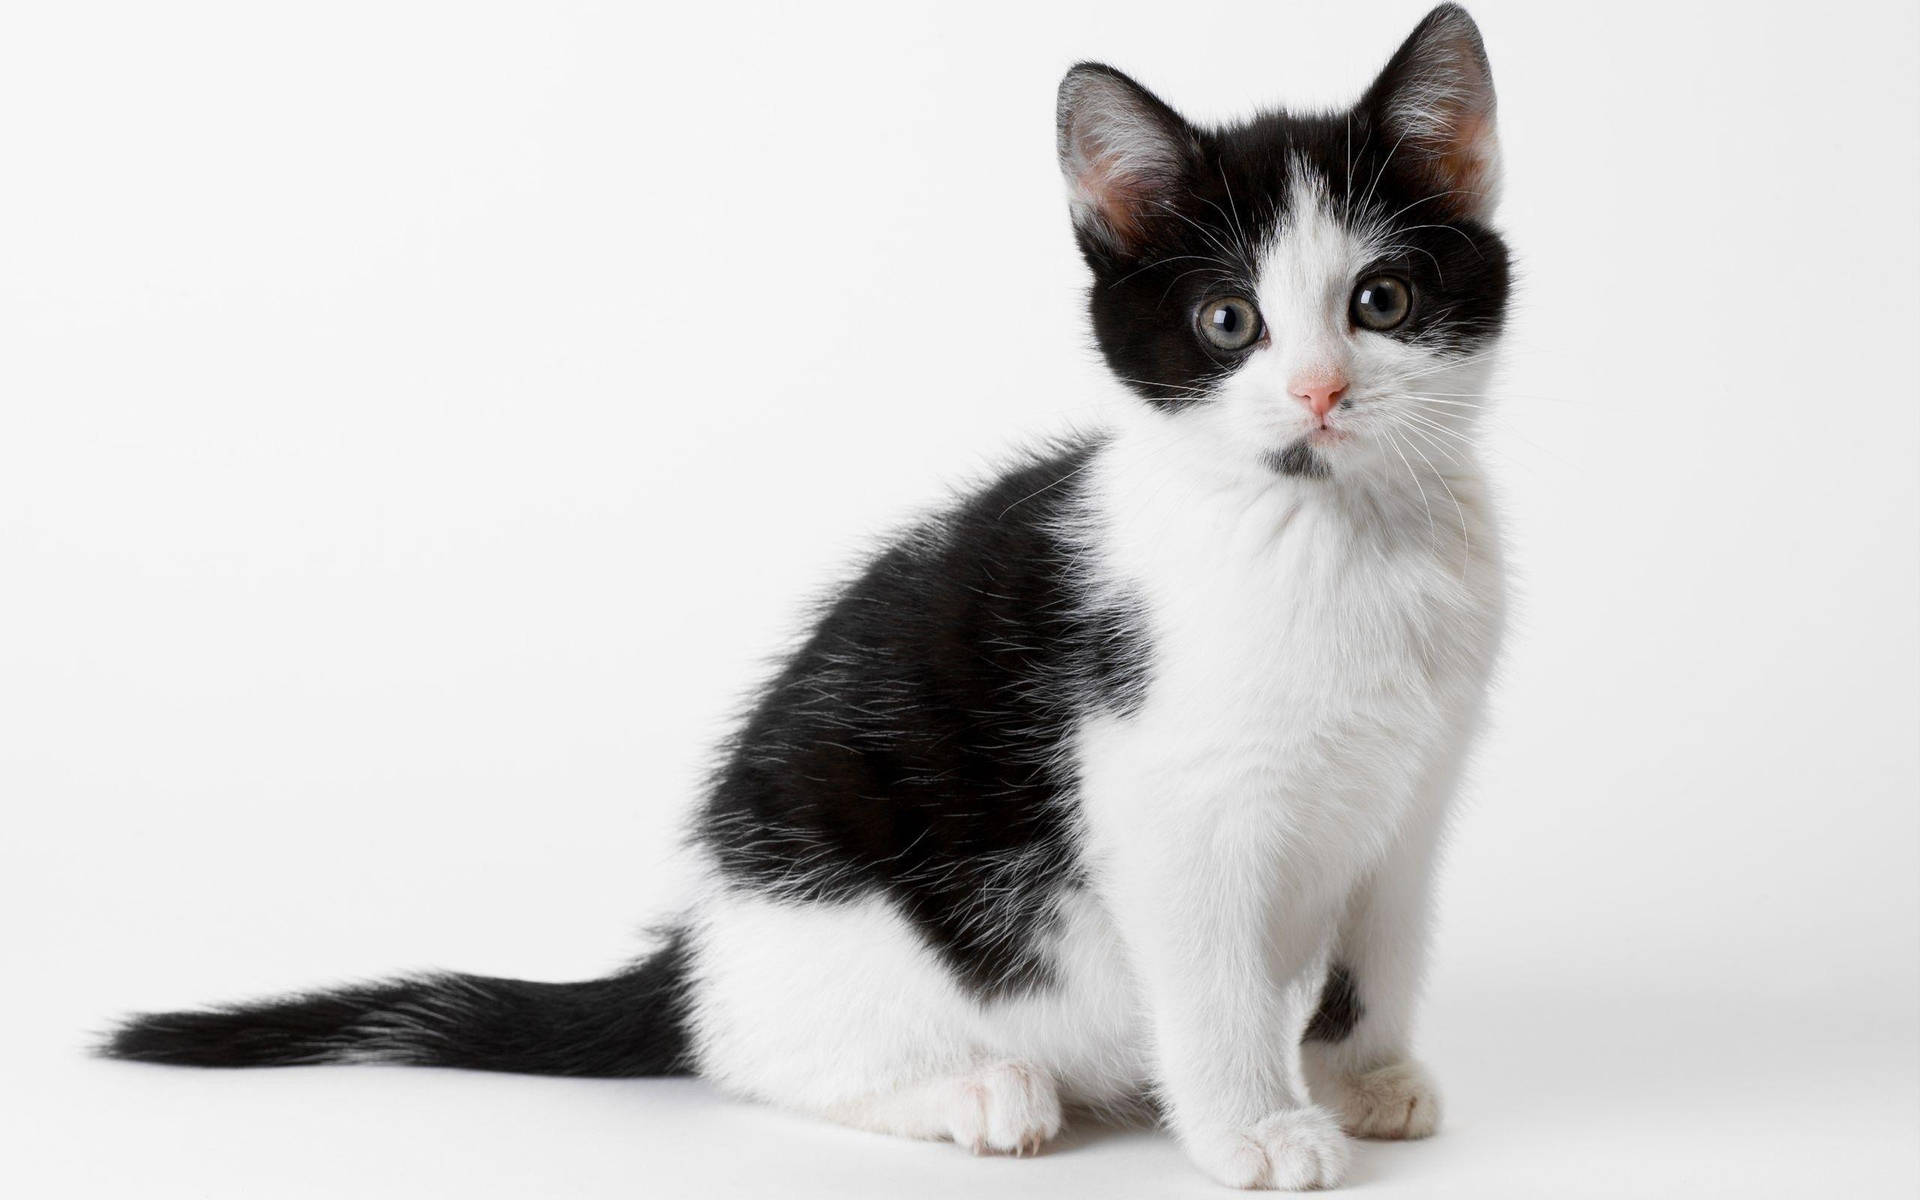 Black And White Cat With Chin Birthmark Background